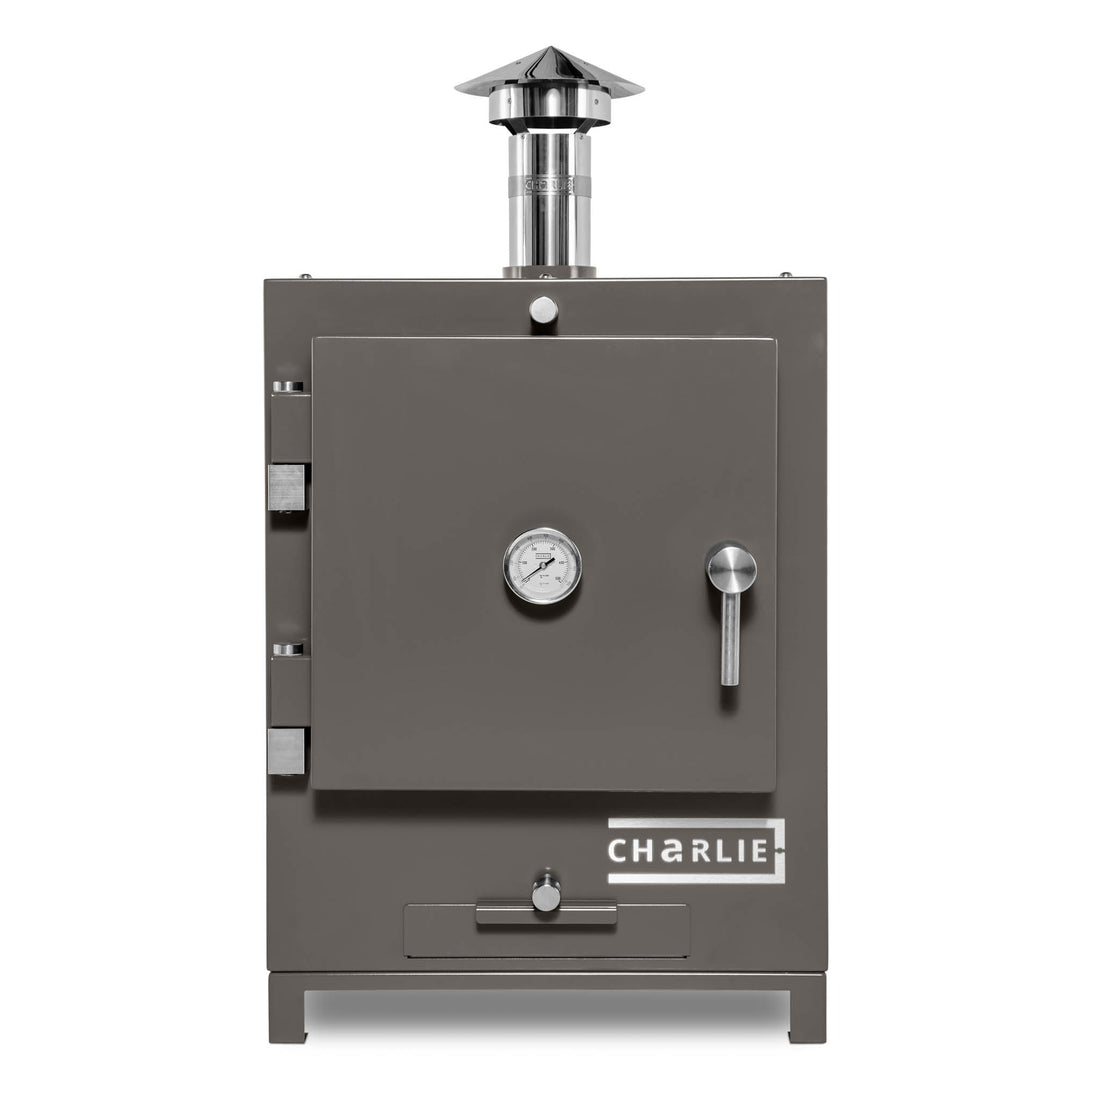 Cheeky Charlie Charcoal Tabletop Oven - Porcini - Charlie Oven